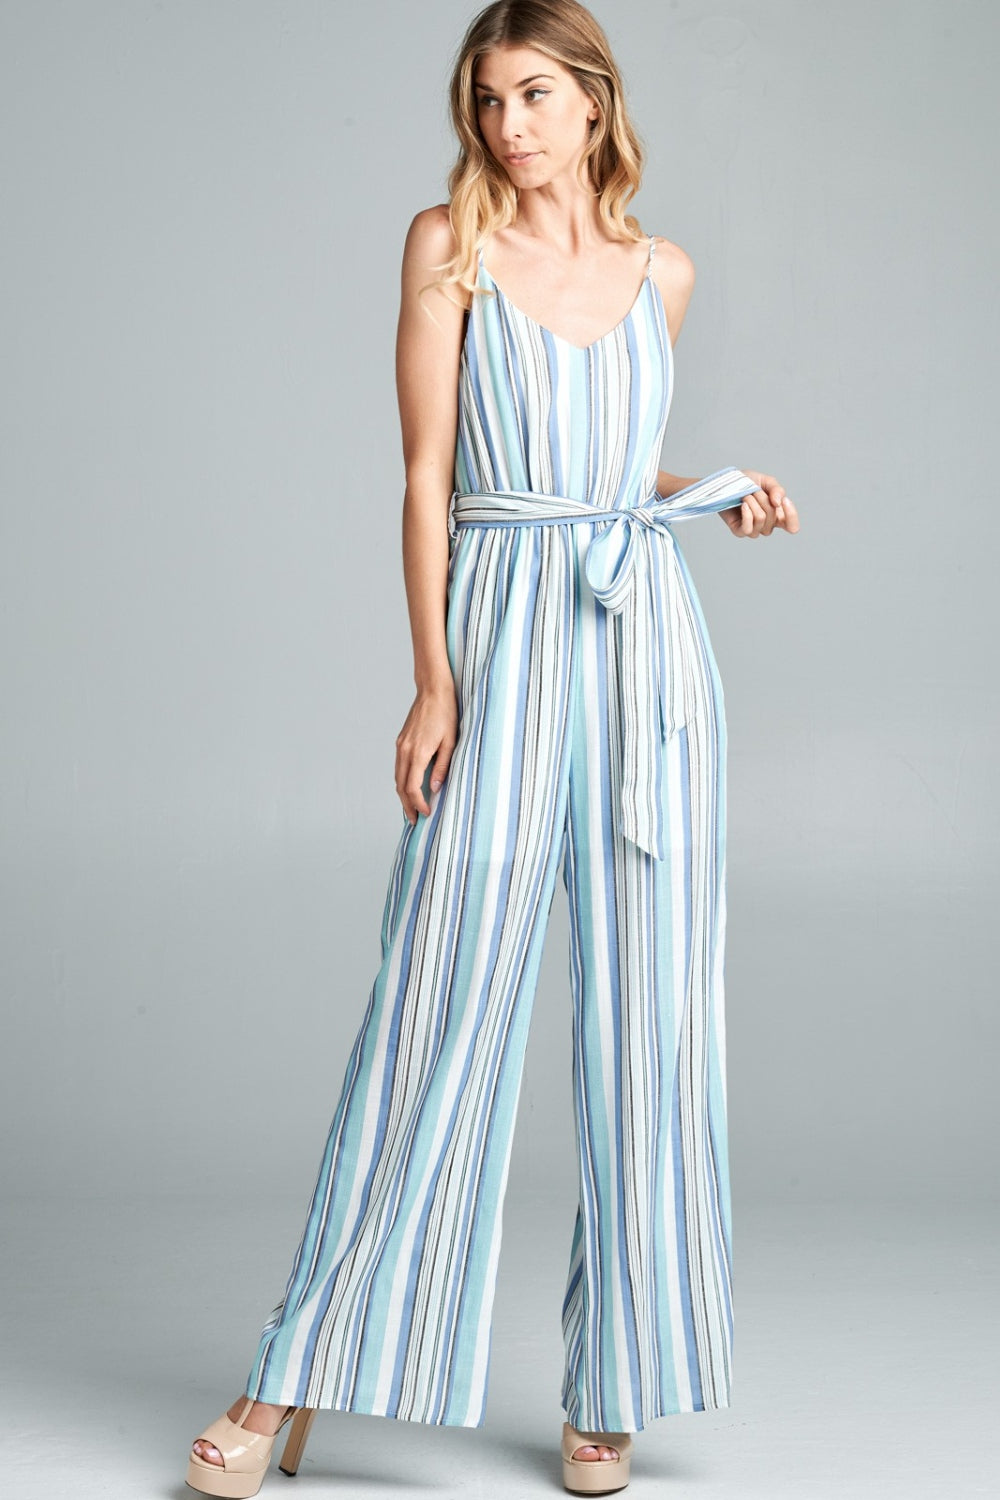 Cotton Bleu by Nu Label Tie Front Striped Sleeveless Jumpsuit Sunset and Swim   